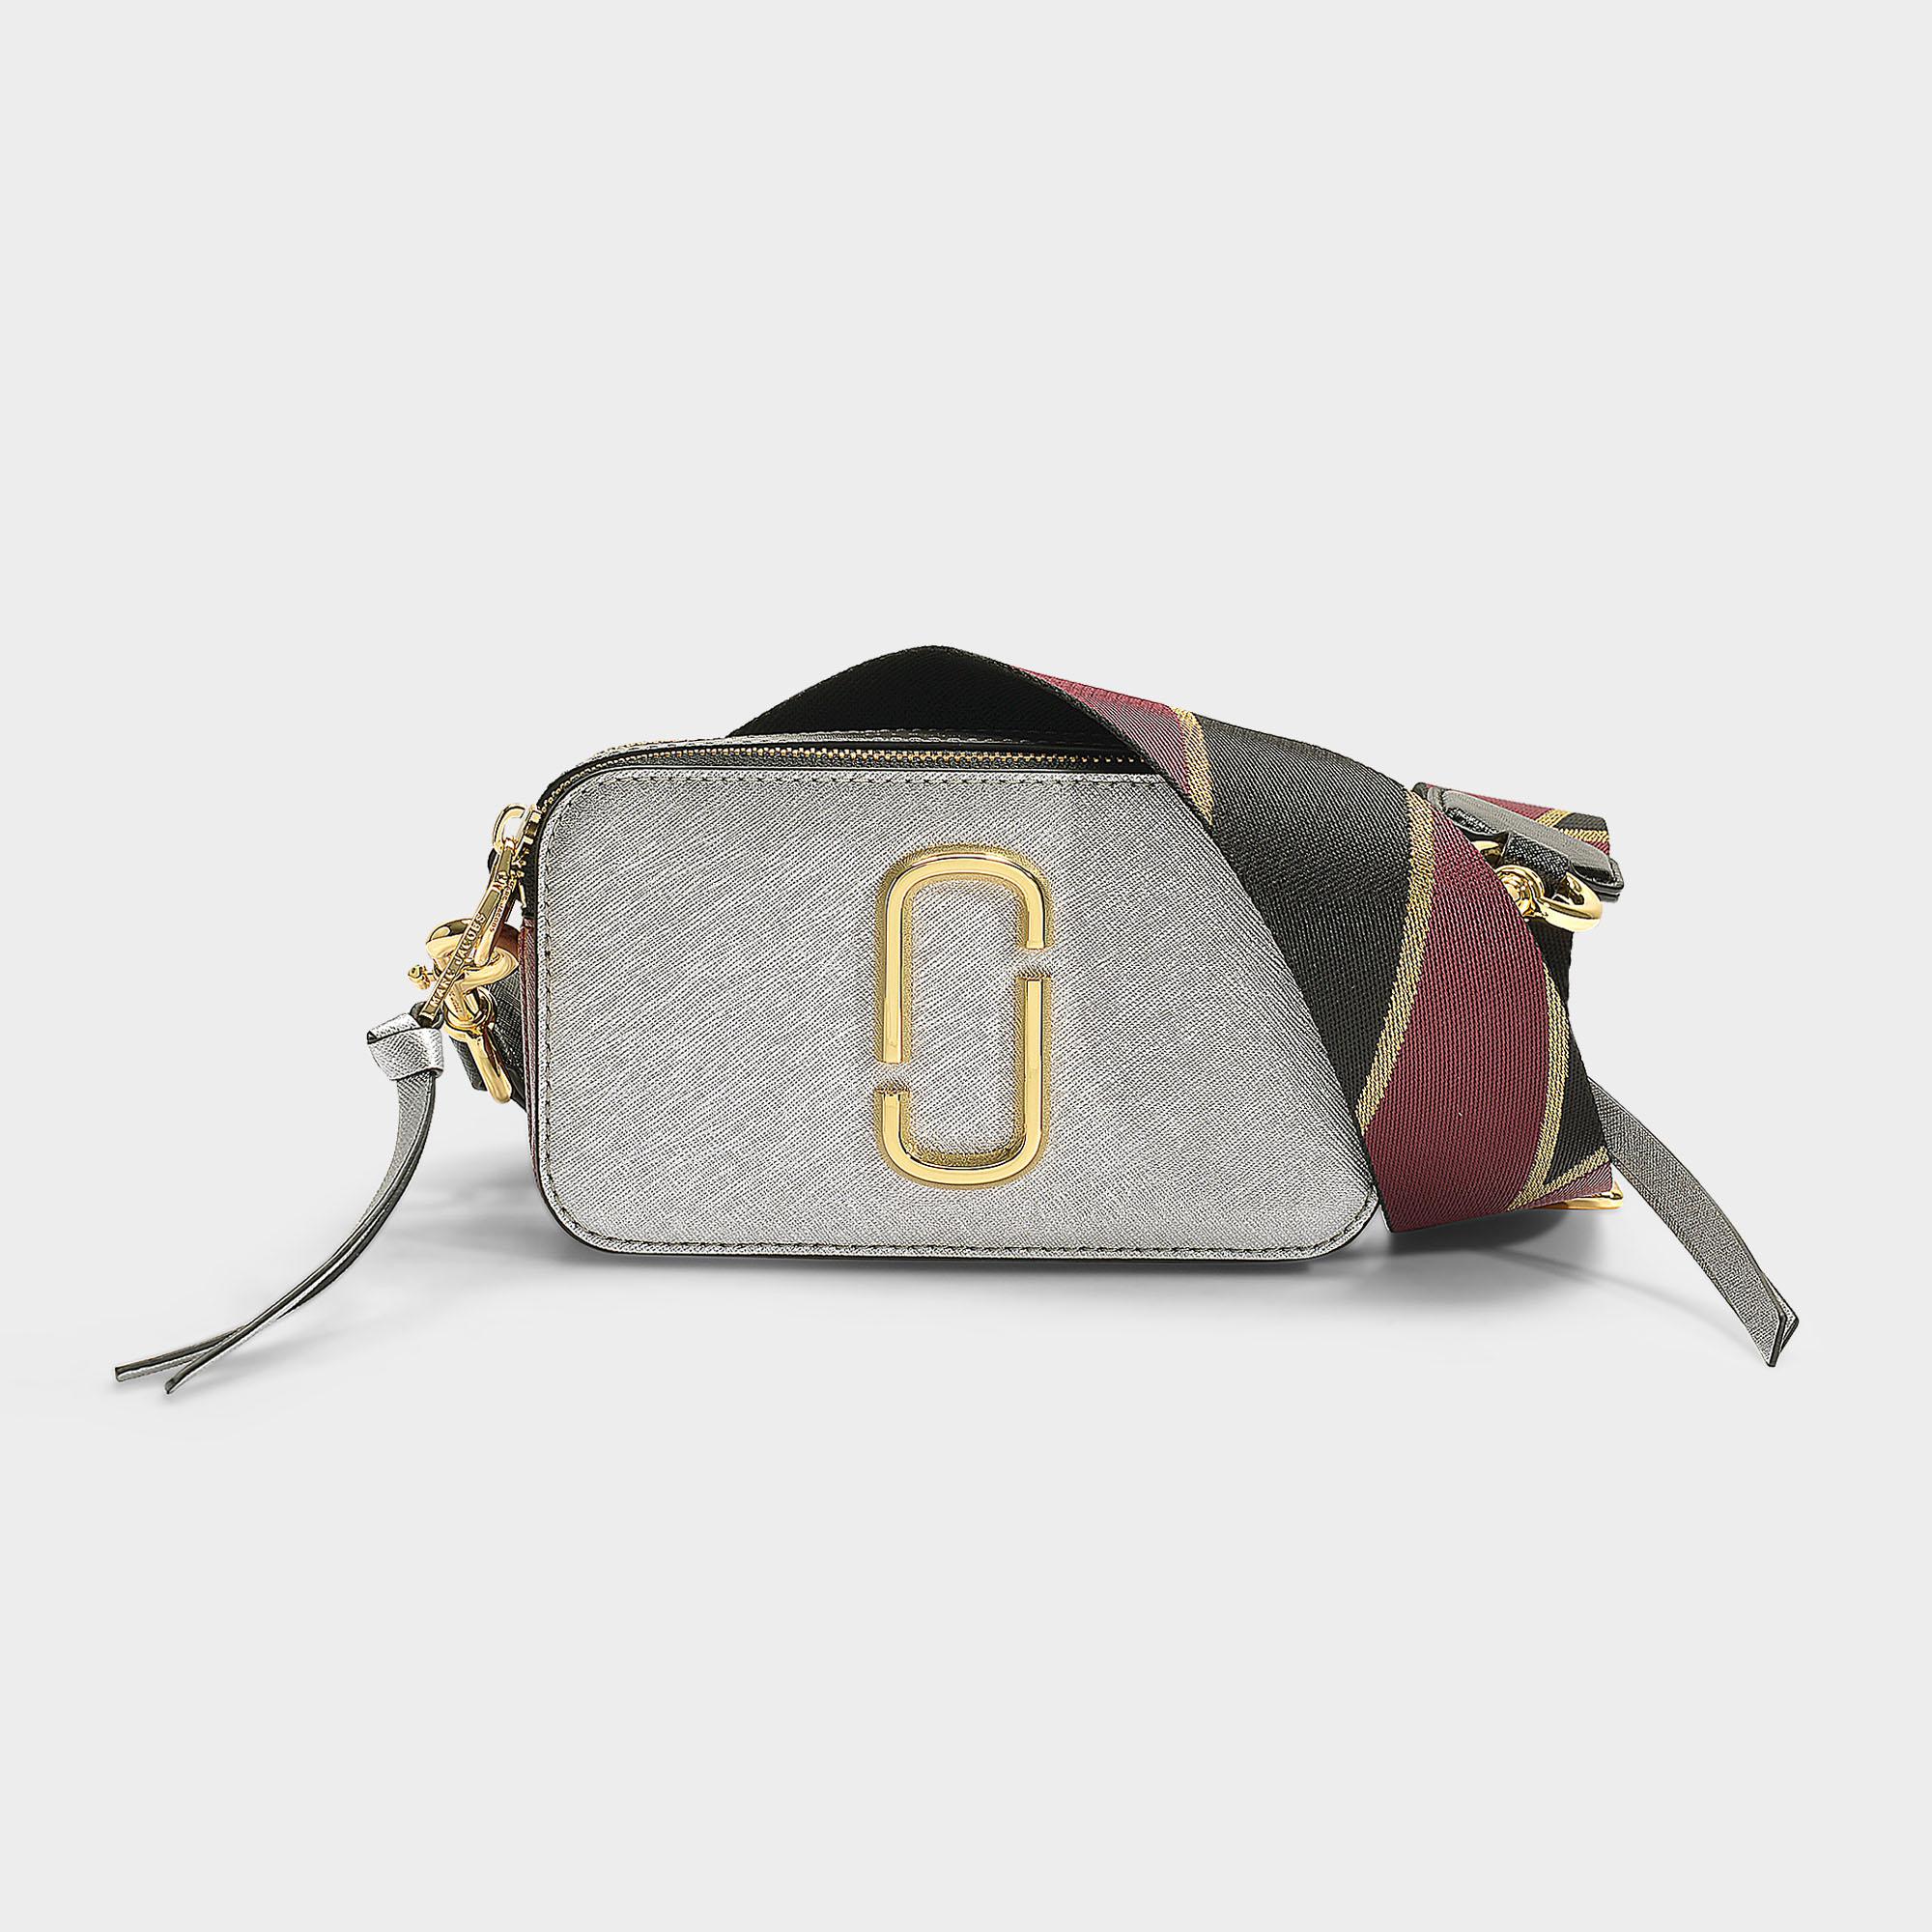 Lyst - Marc Jacobs Snapshot Bag In Silver Leather With Polyurethane Coating in Metallic